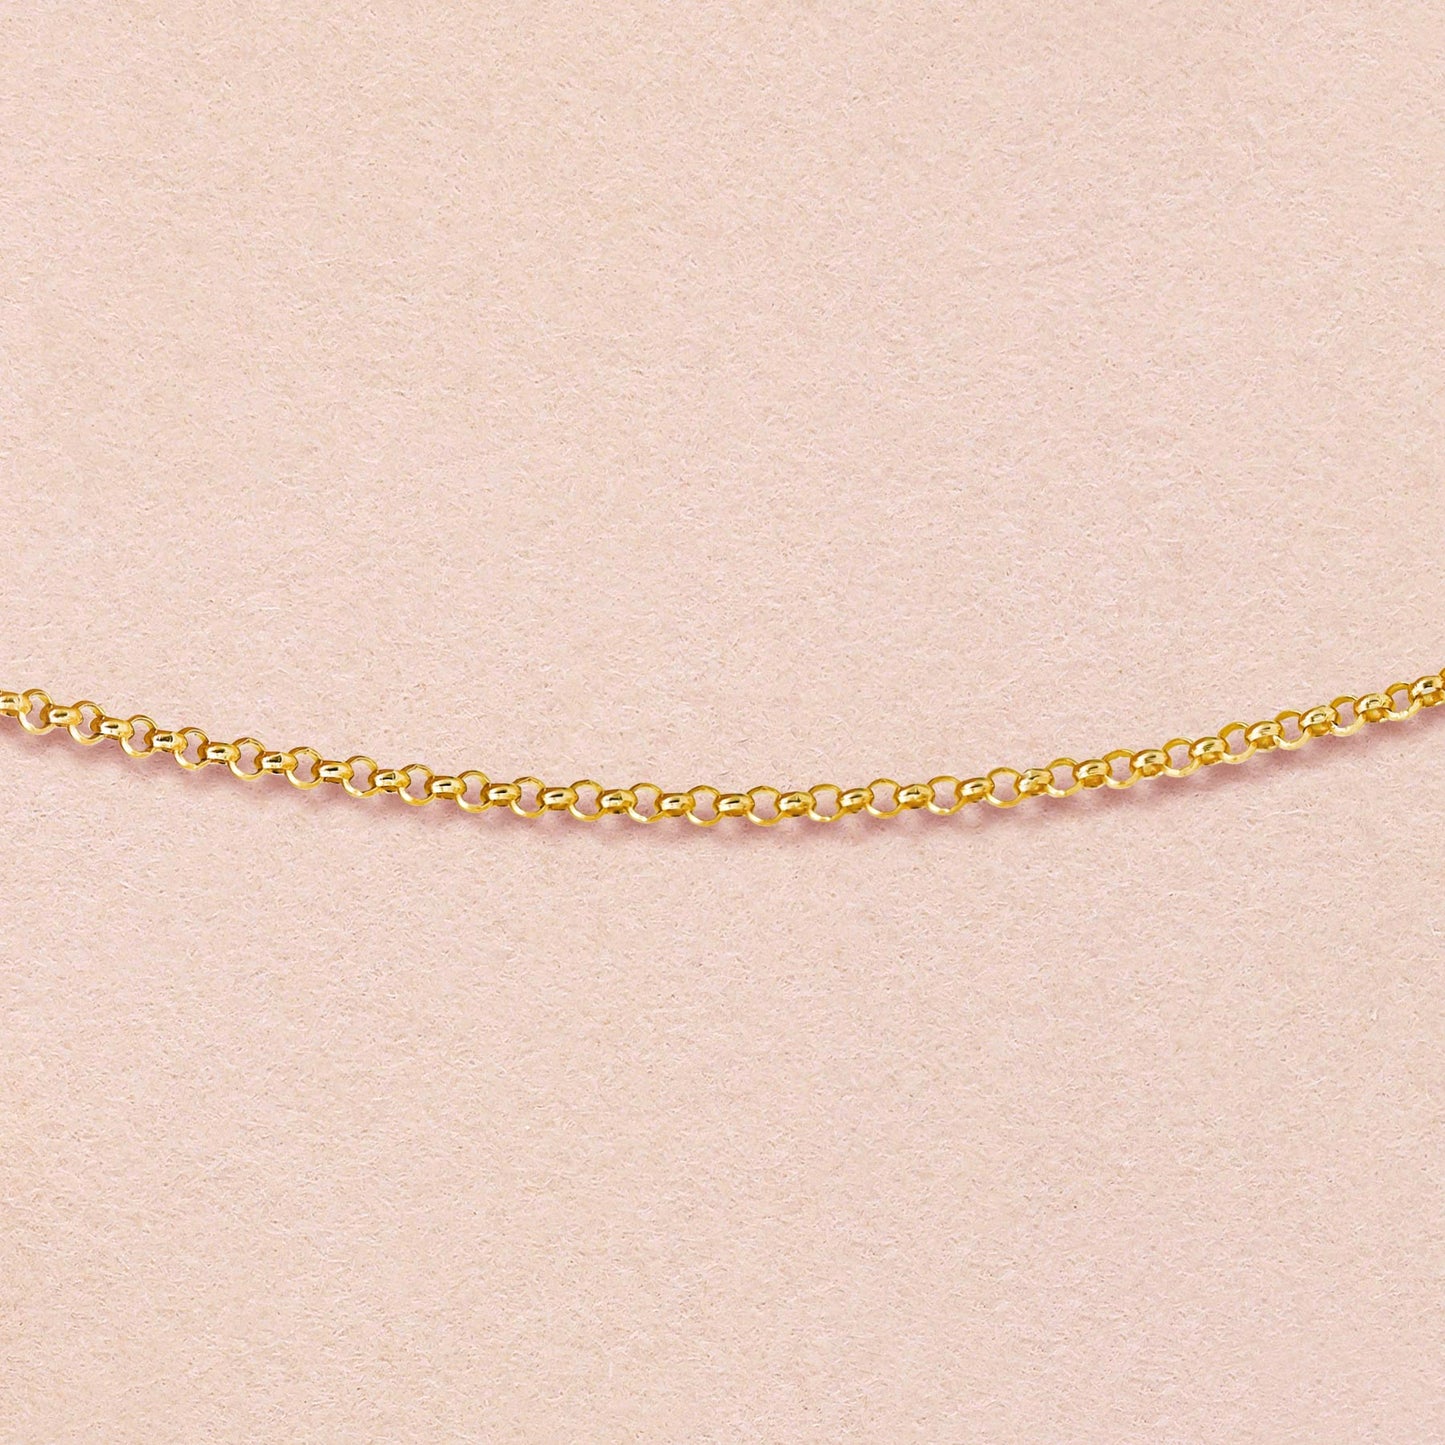 [GARDEN] 925 Sterling Silver Half Round Chain 45cm (Yellow Gold) - Product Image